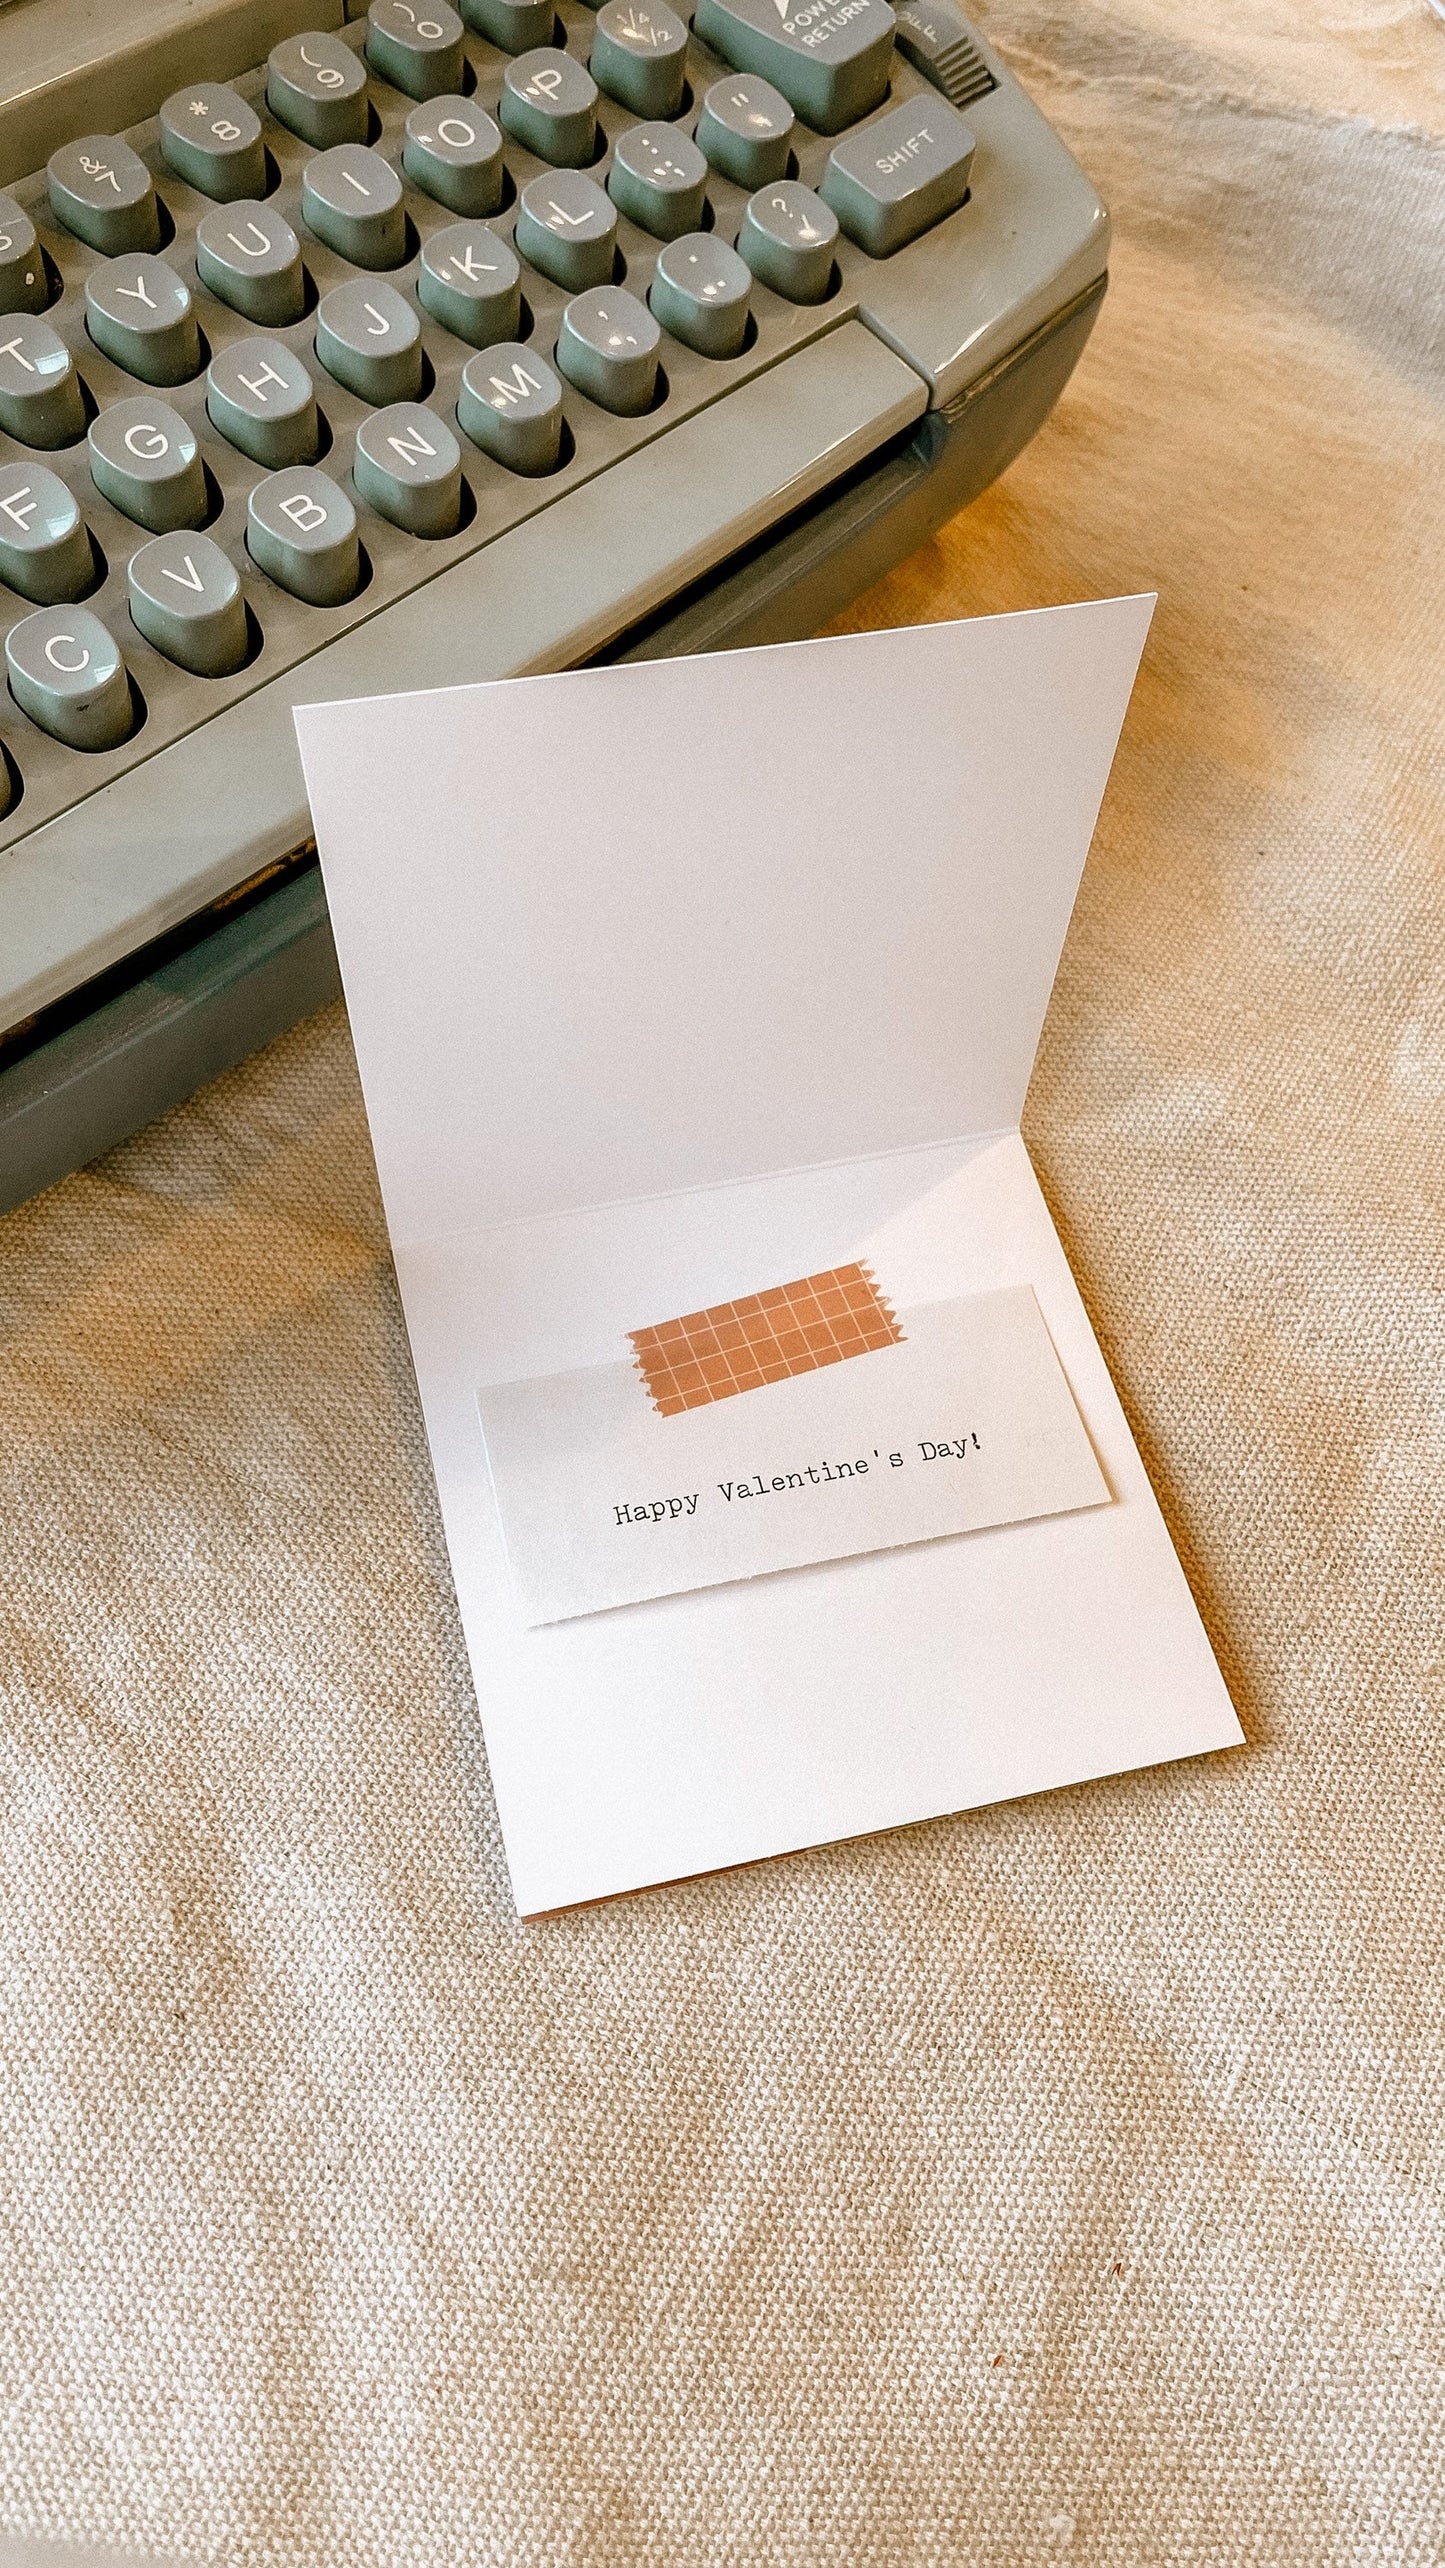 You’re The Best // Hand Designed Blank Card with FREE gift message option